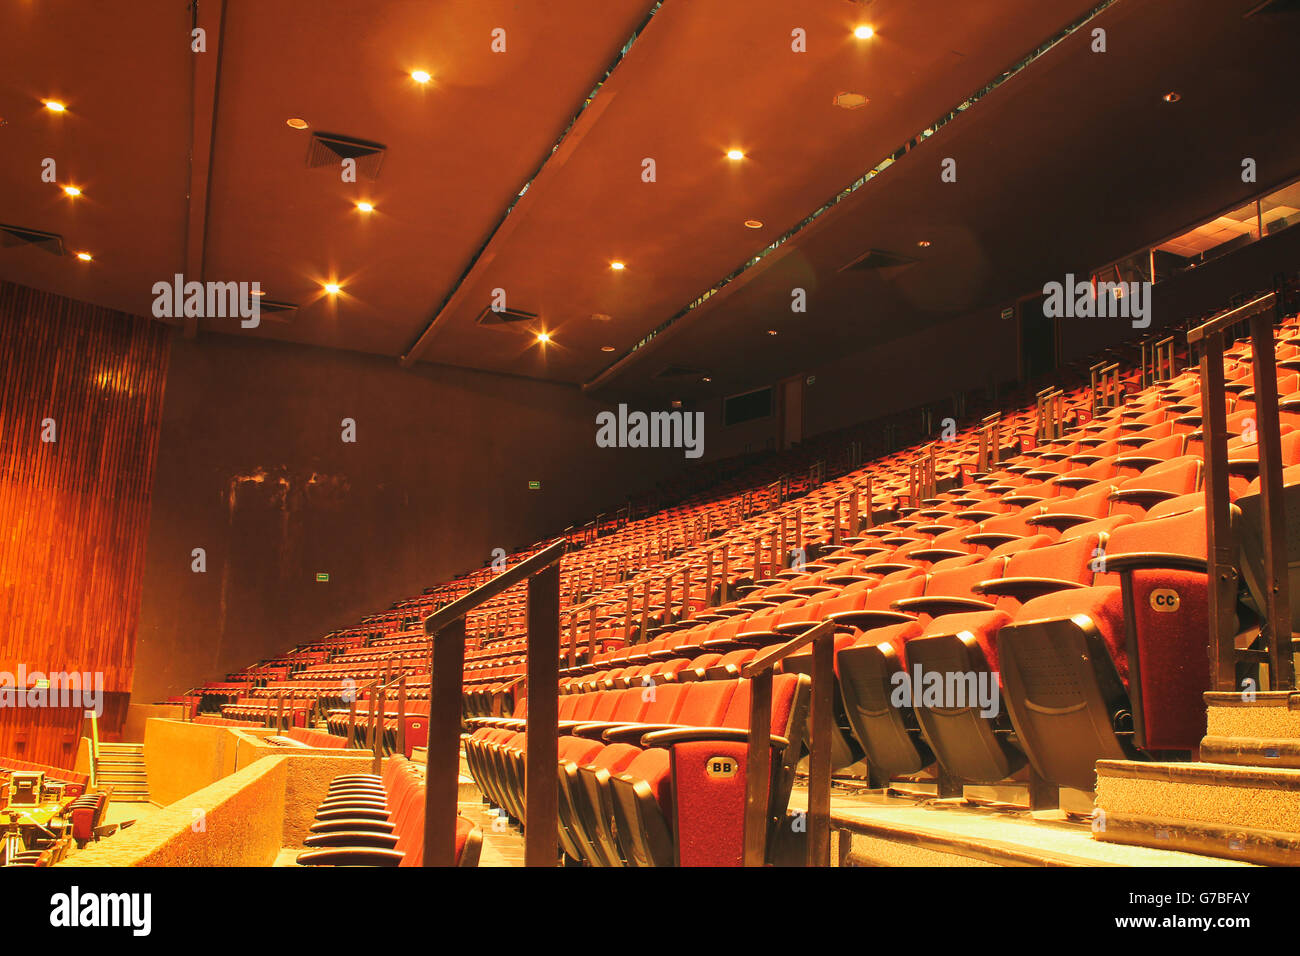 Photograph of an empty theater with red seats Stock Photo